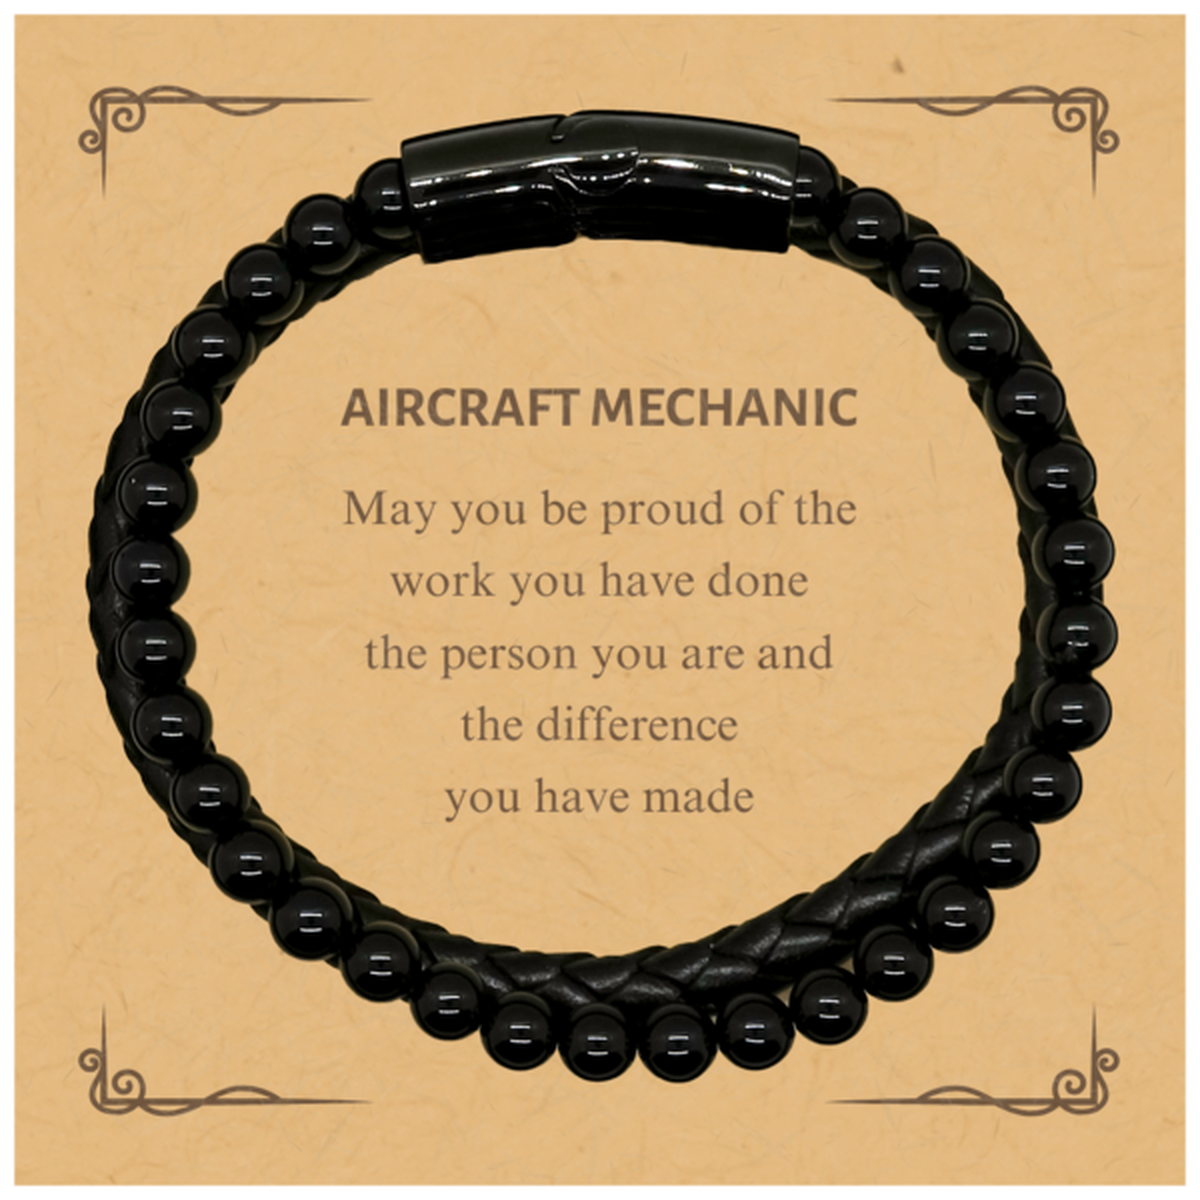 Aircraft Mechanic May you be proud of the work you have done, Retirement Aircraft Mechanic Stone Leather Bracelets for Colleague Appreciation Gifts Amazing for Aircraft Mechanic